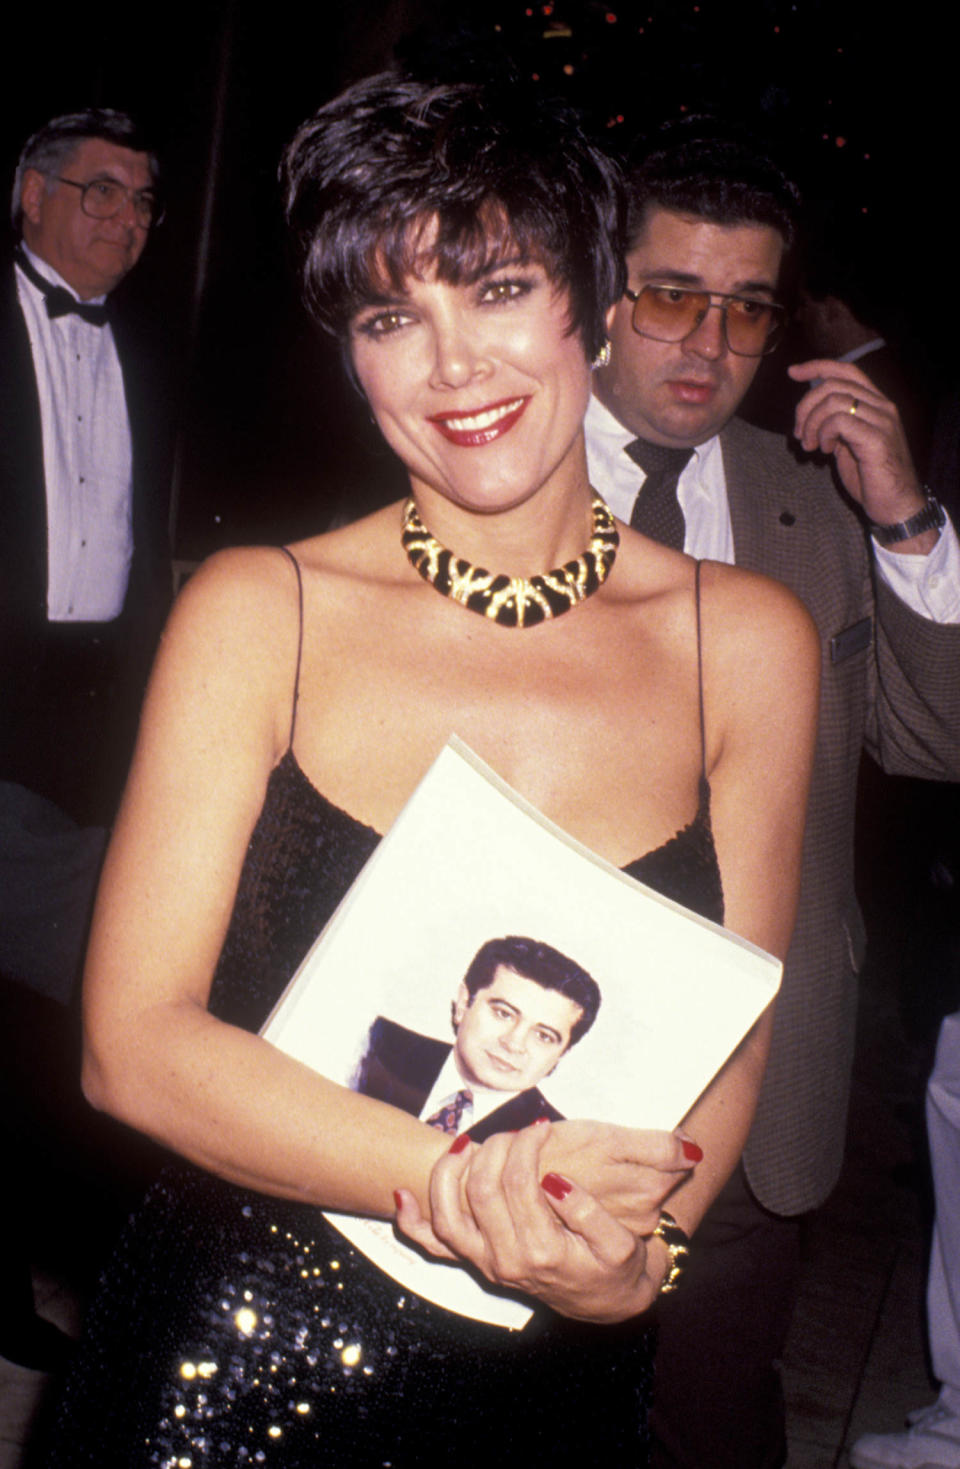 Kris Jenner in 1990 (Ron Galella / Getty Images)